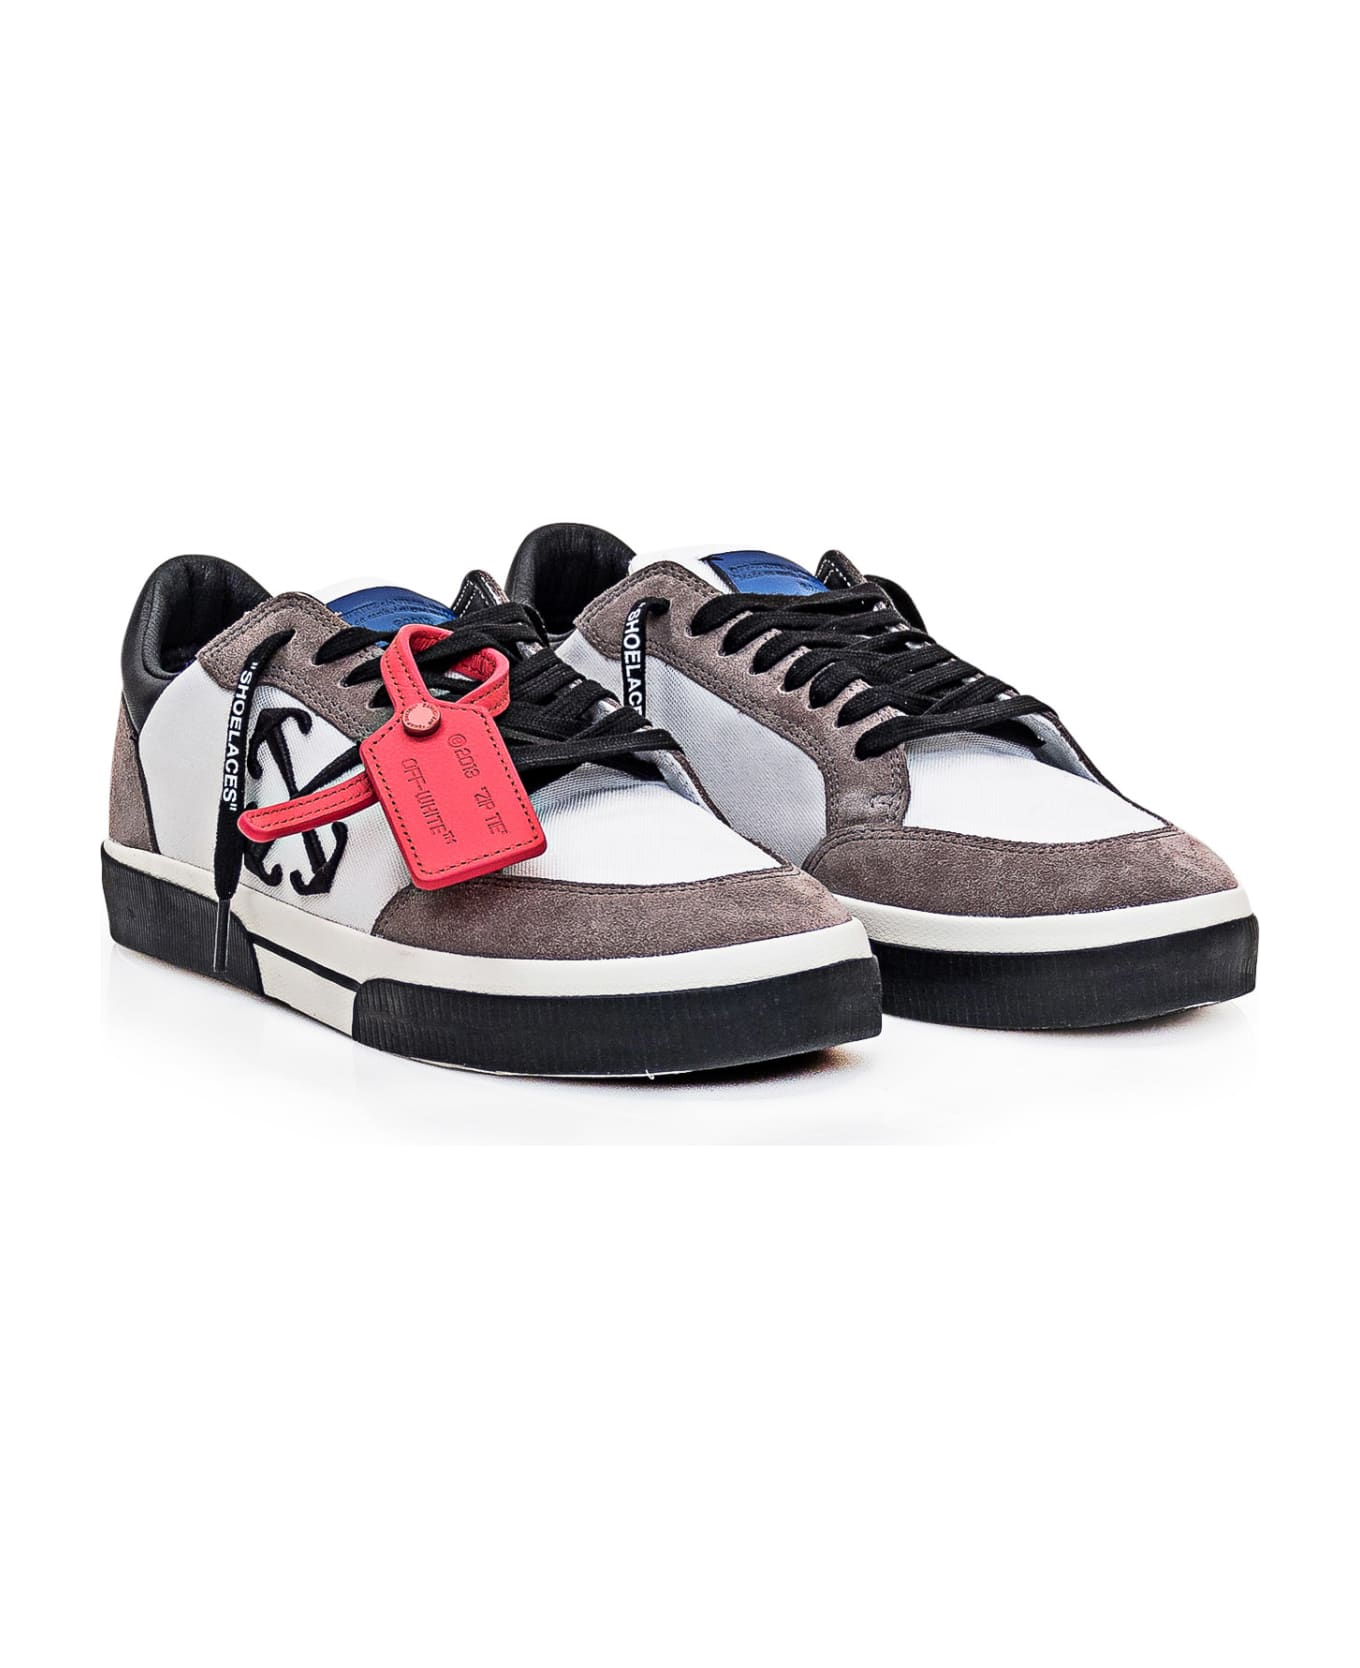 Off-White New Low Vulcanized Sneakers - WHITE BLACK BEIGE